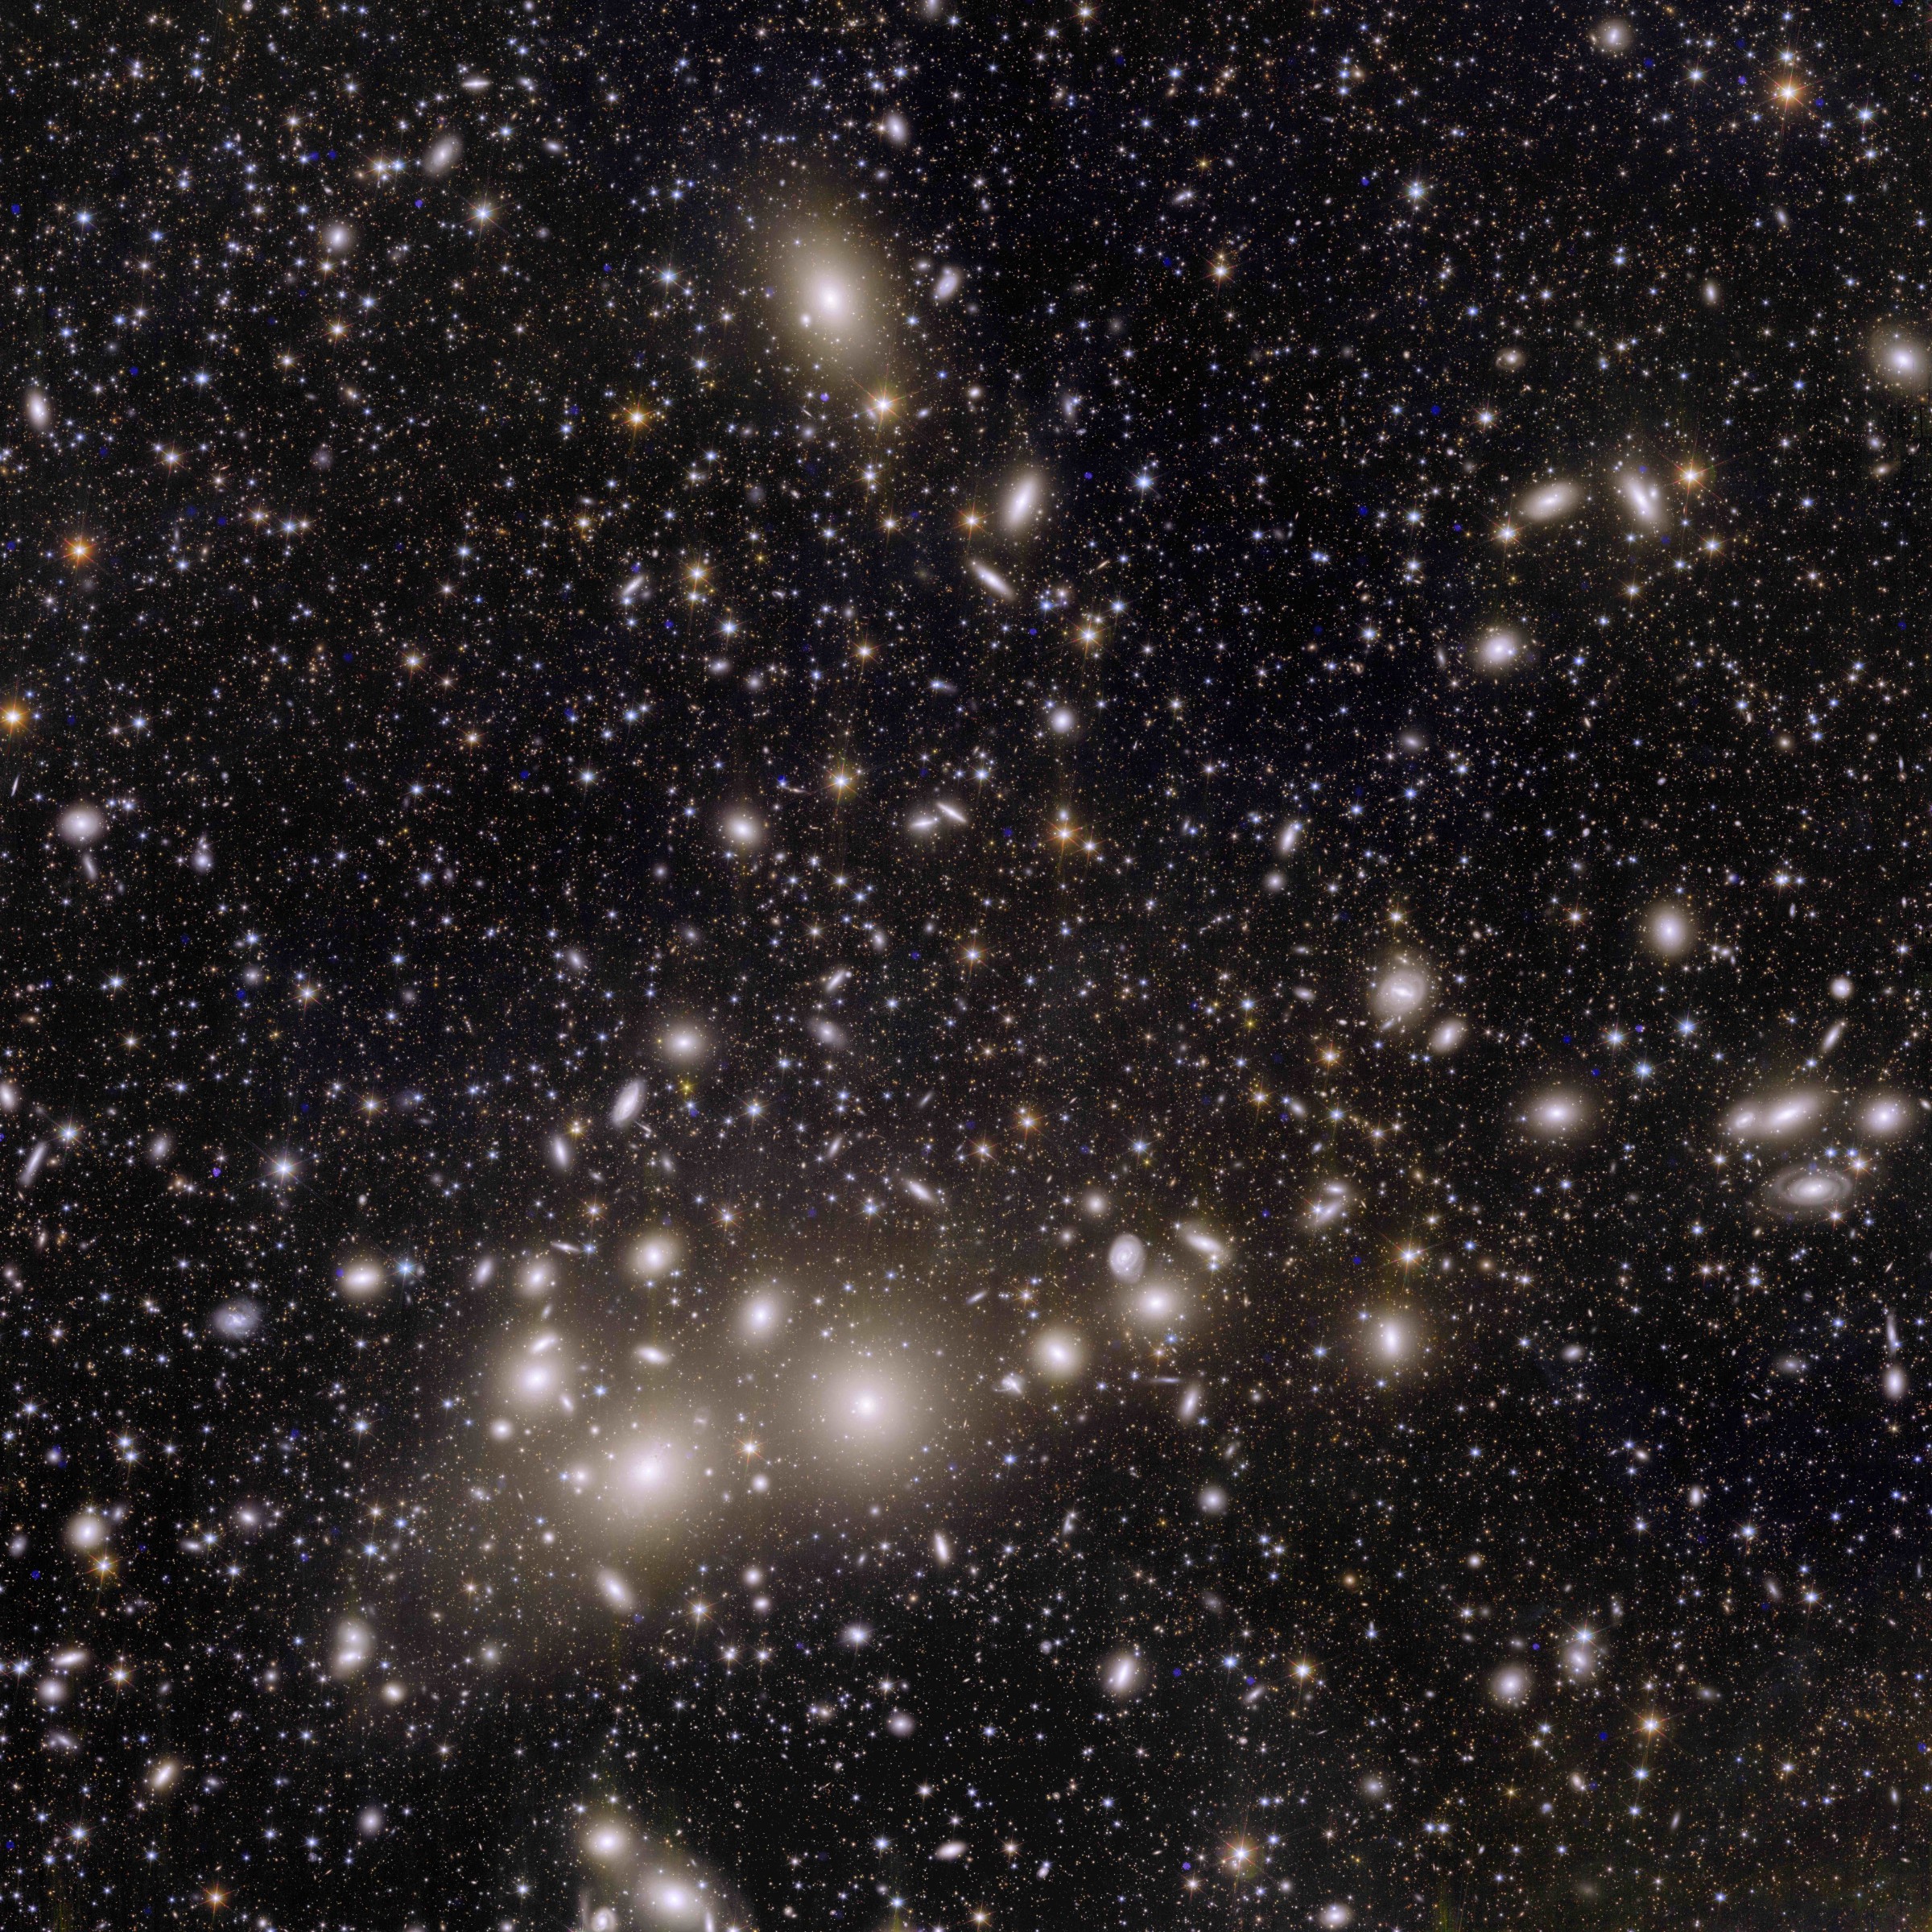 Euclid's view of the perseus galaxy cluster